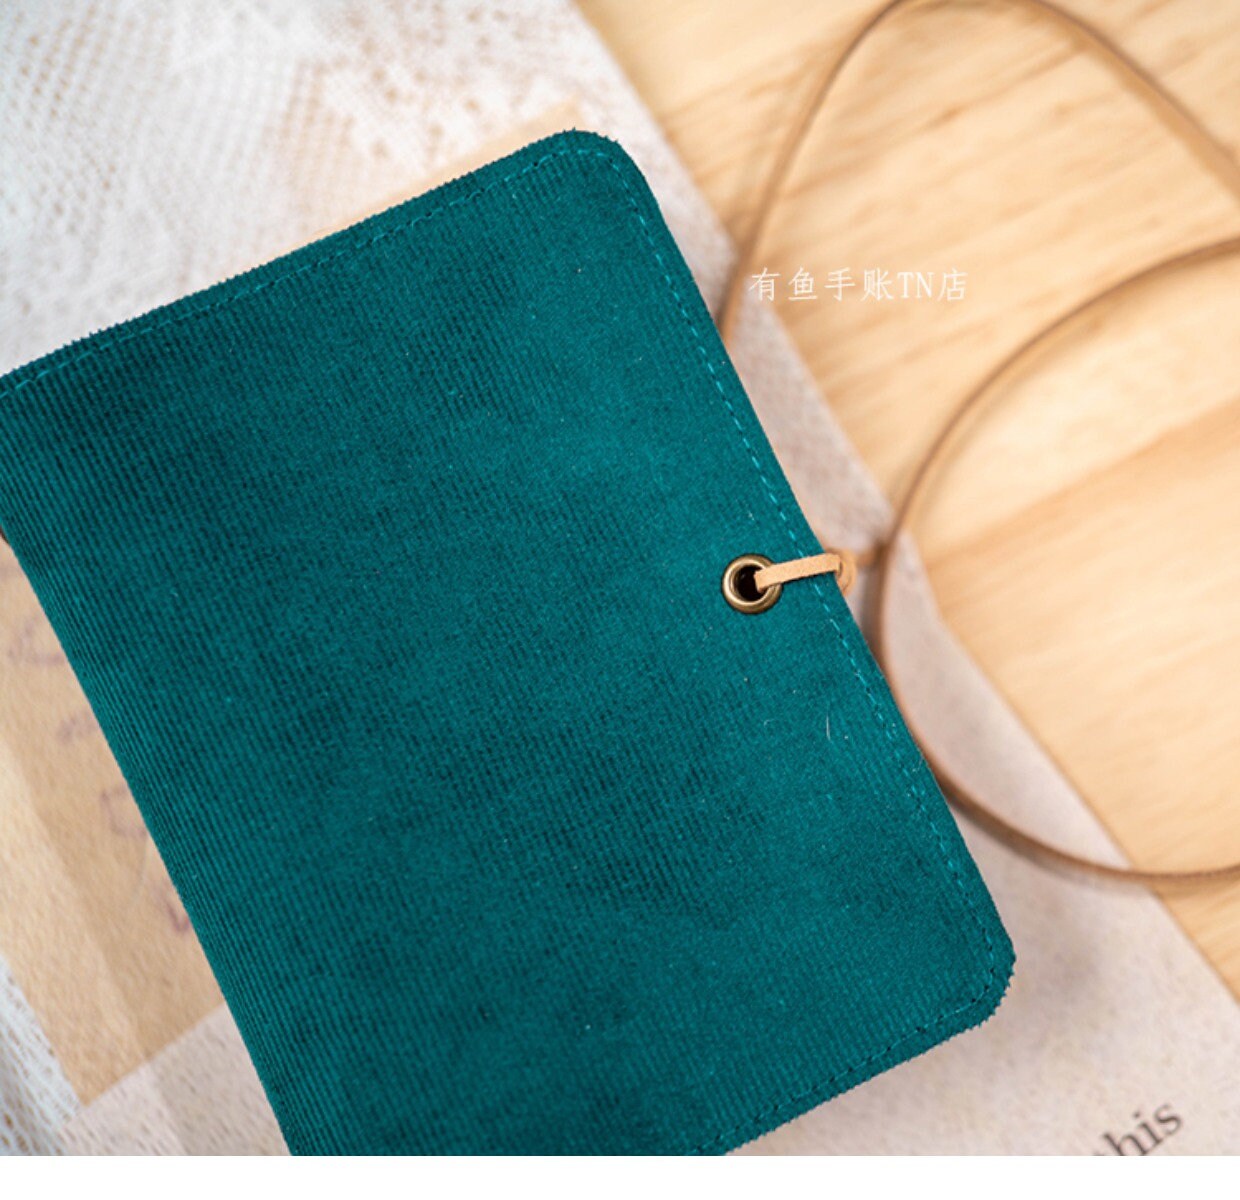 Green Corduroy Passport Size Traveler's Notebook Handmade TN Journal with 3 Insert Vantage Portable Notepad Perfect for Writing Gift for her